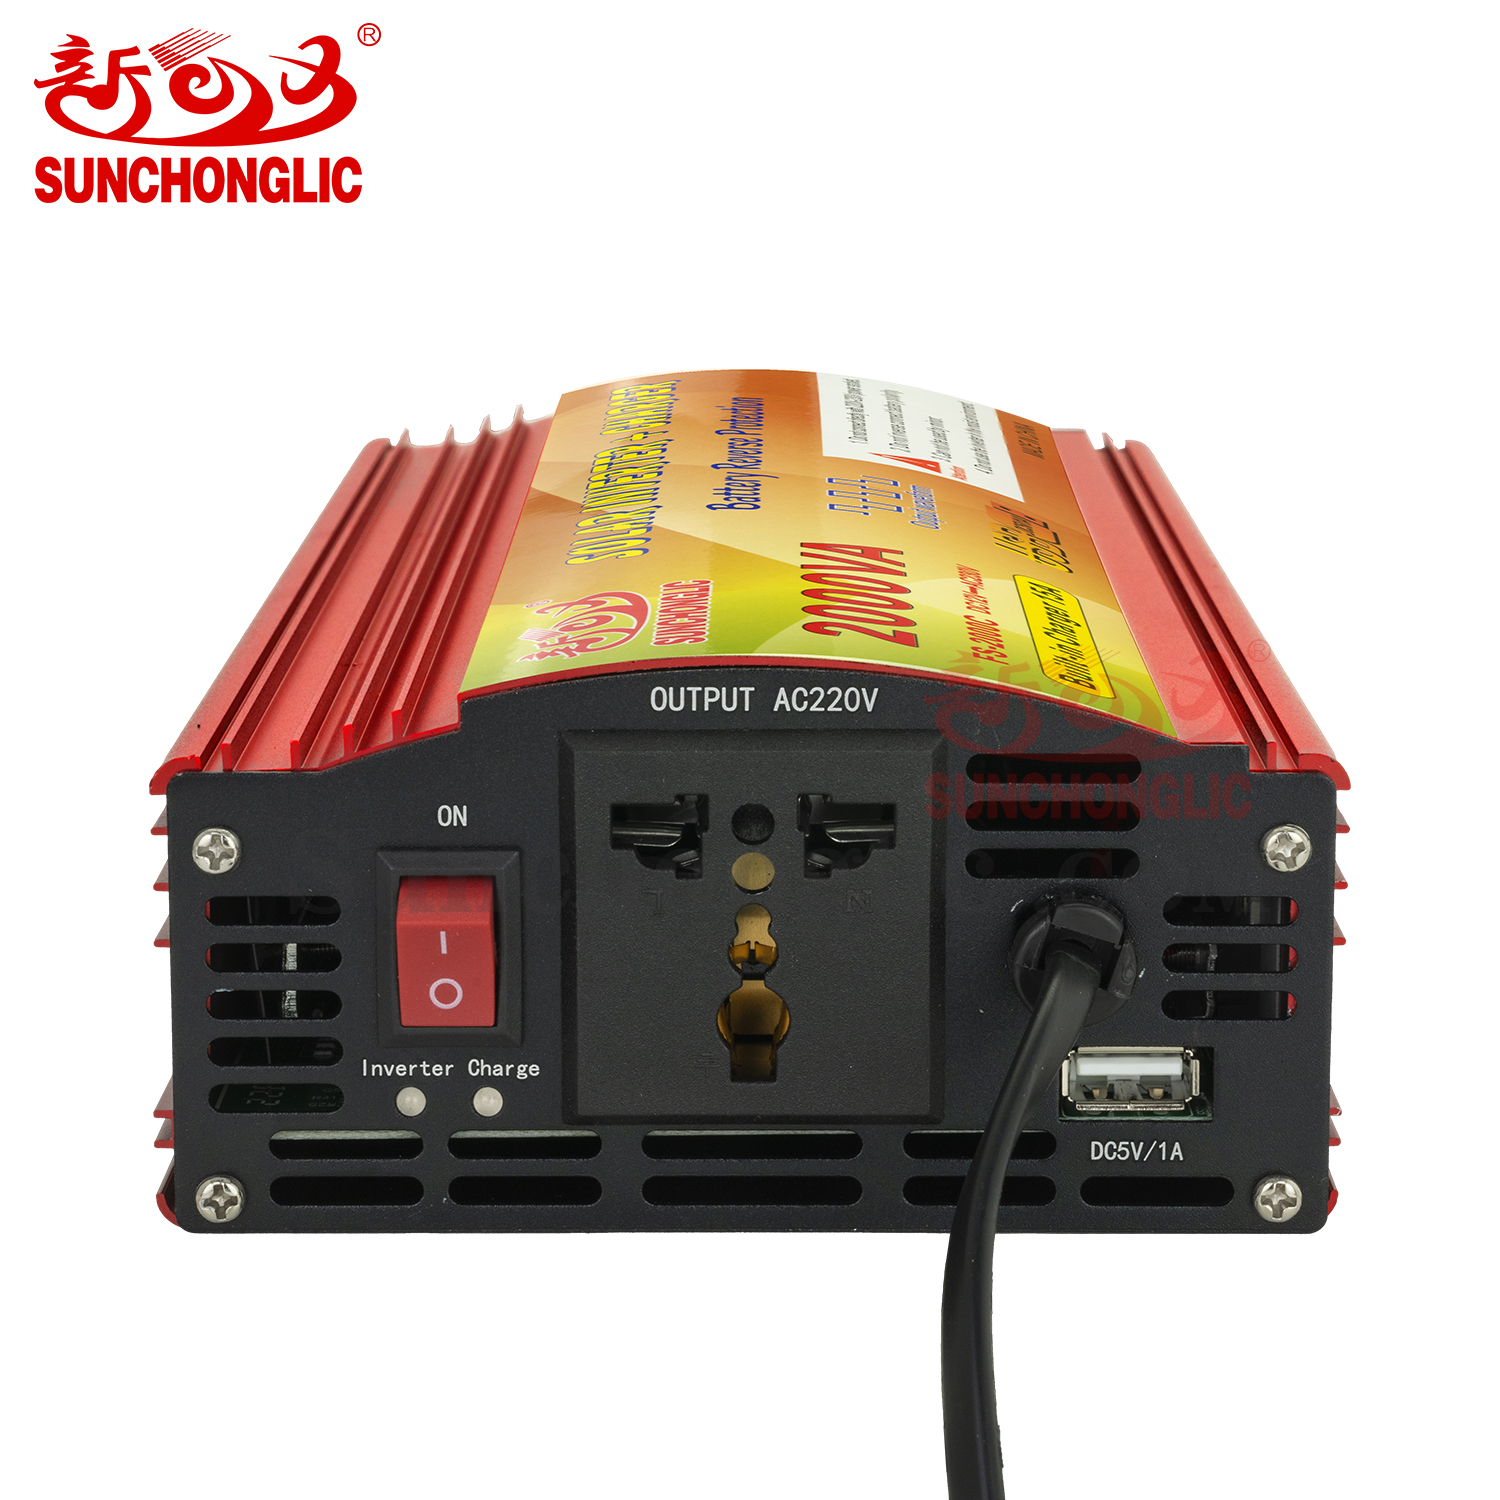 Inverter With Charger - FS-2000C